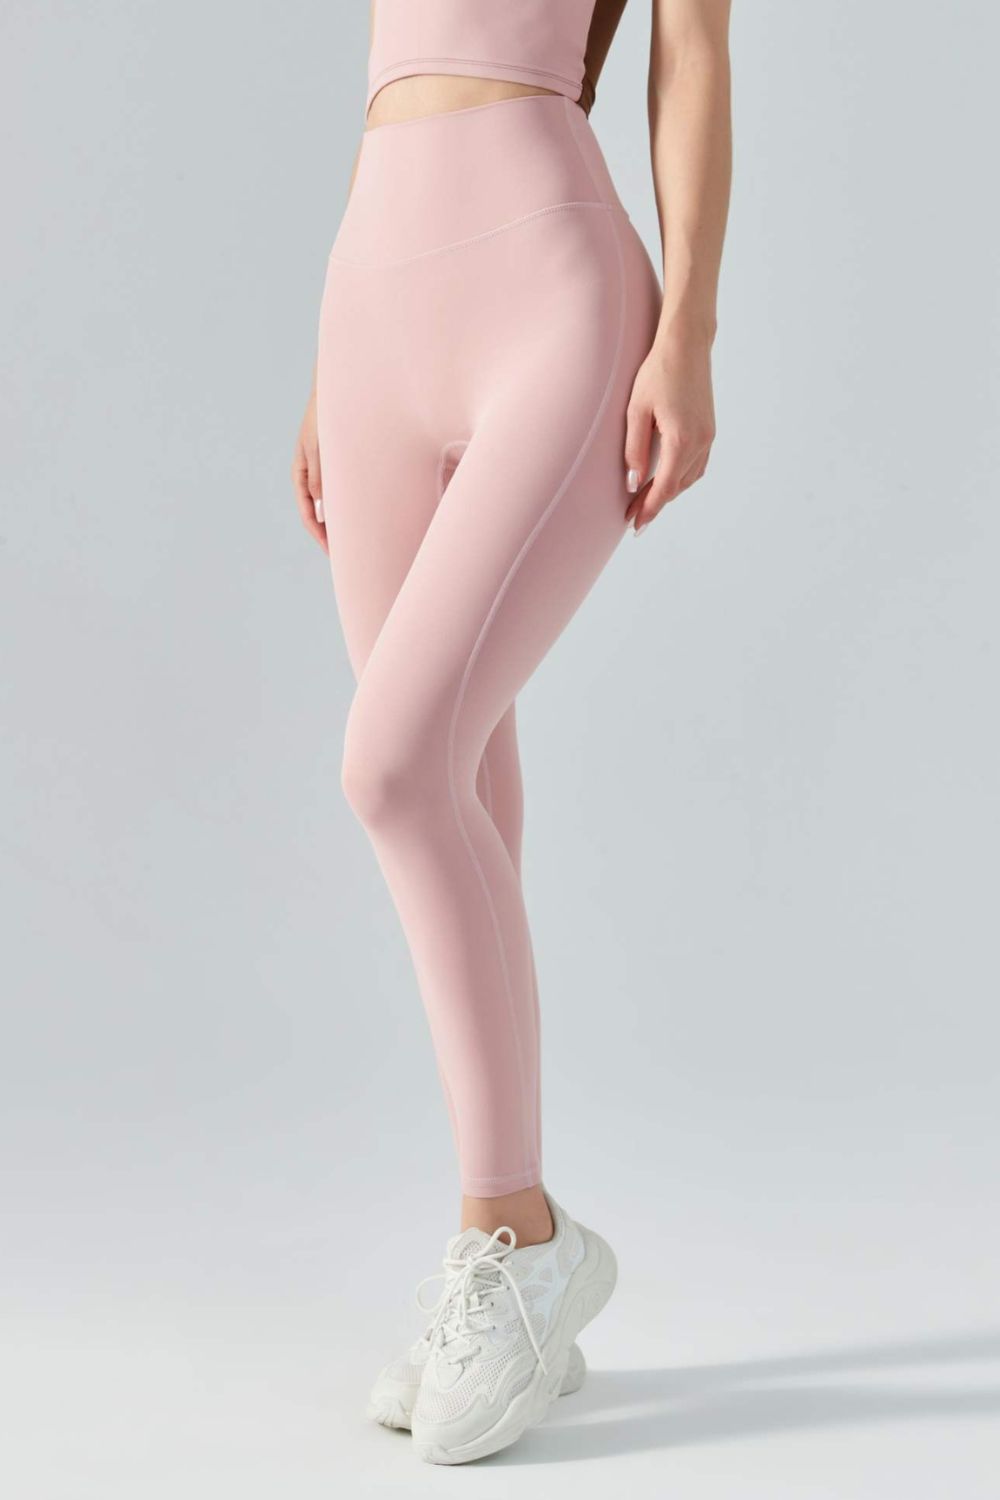 Barely There Fitness Leggings